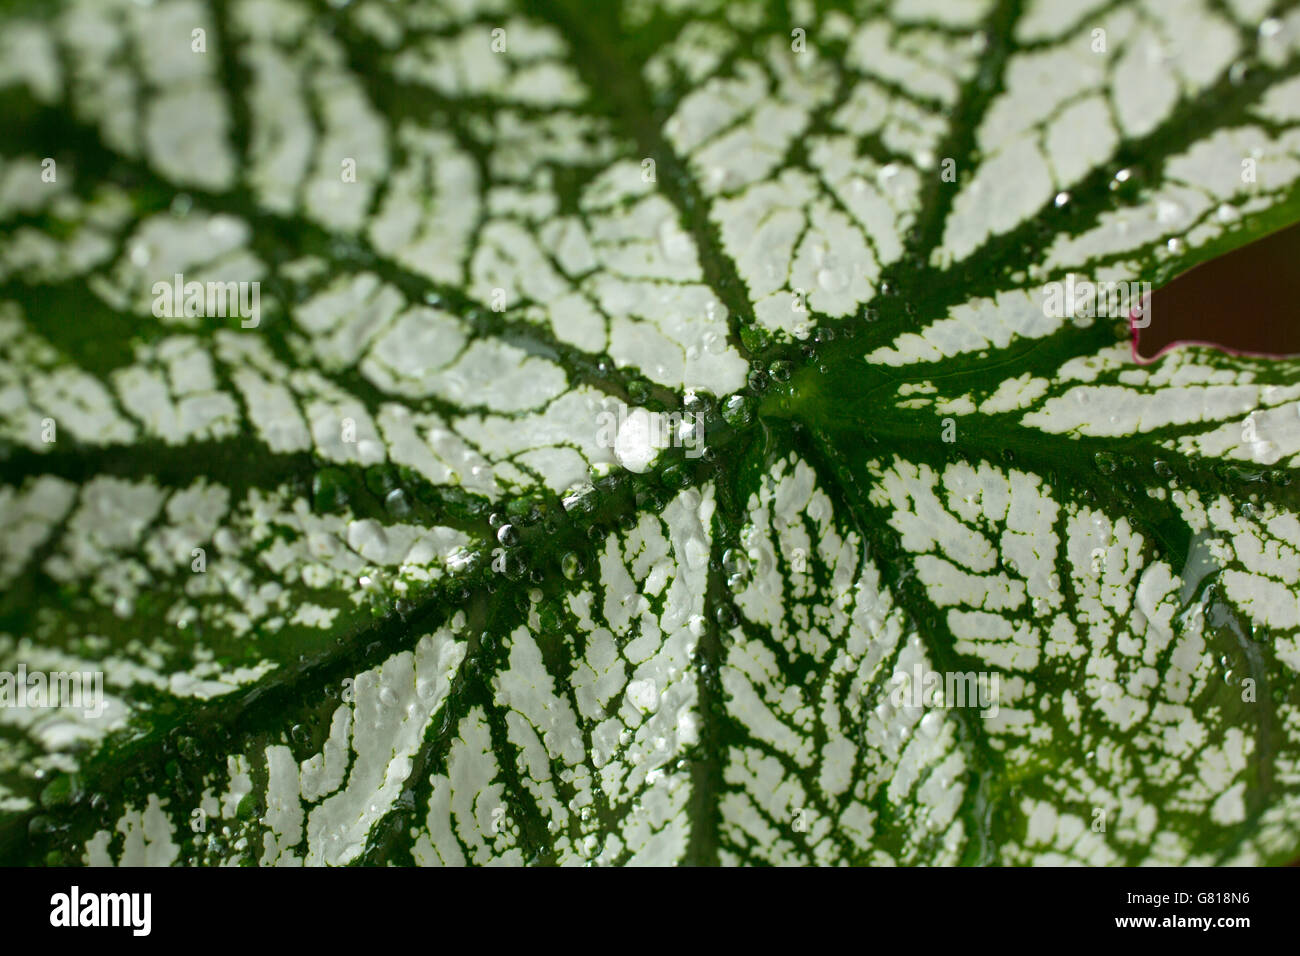 Green and sliver leaf Stock Photo